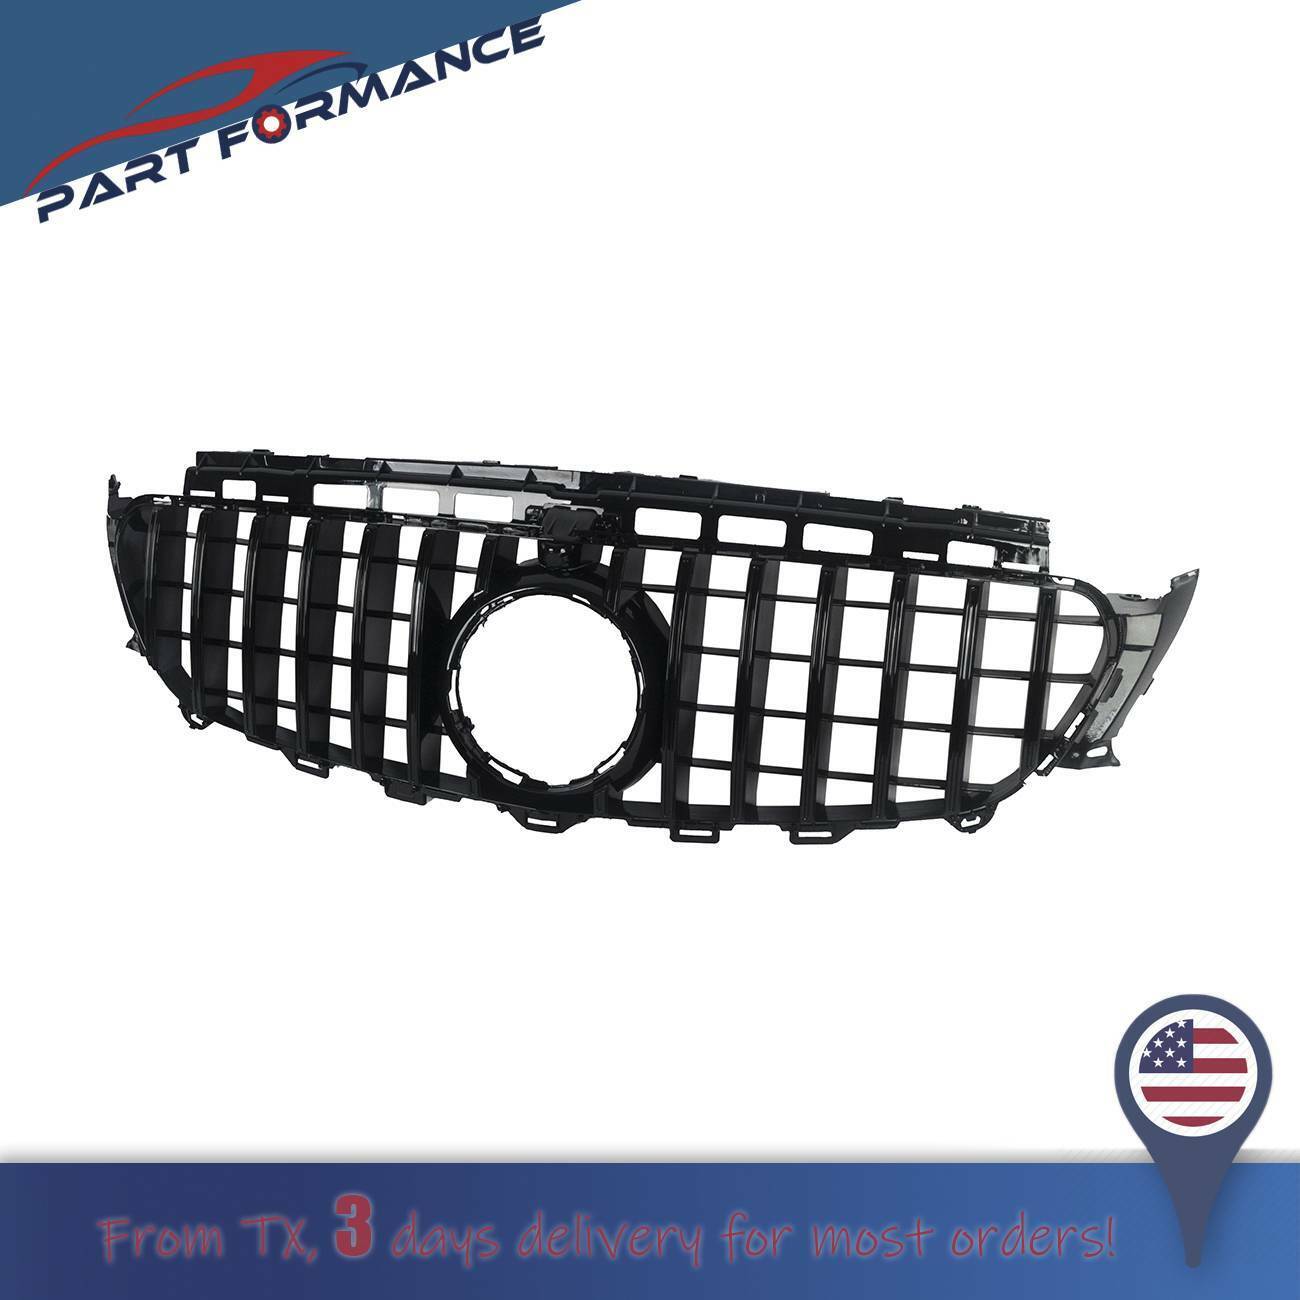 GT R Grille Fit Mercedes Benz W213 E-CLASS 2016-2020 W/ CAMERA HOLE ALL Black 